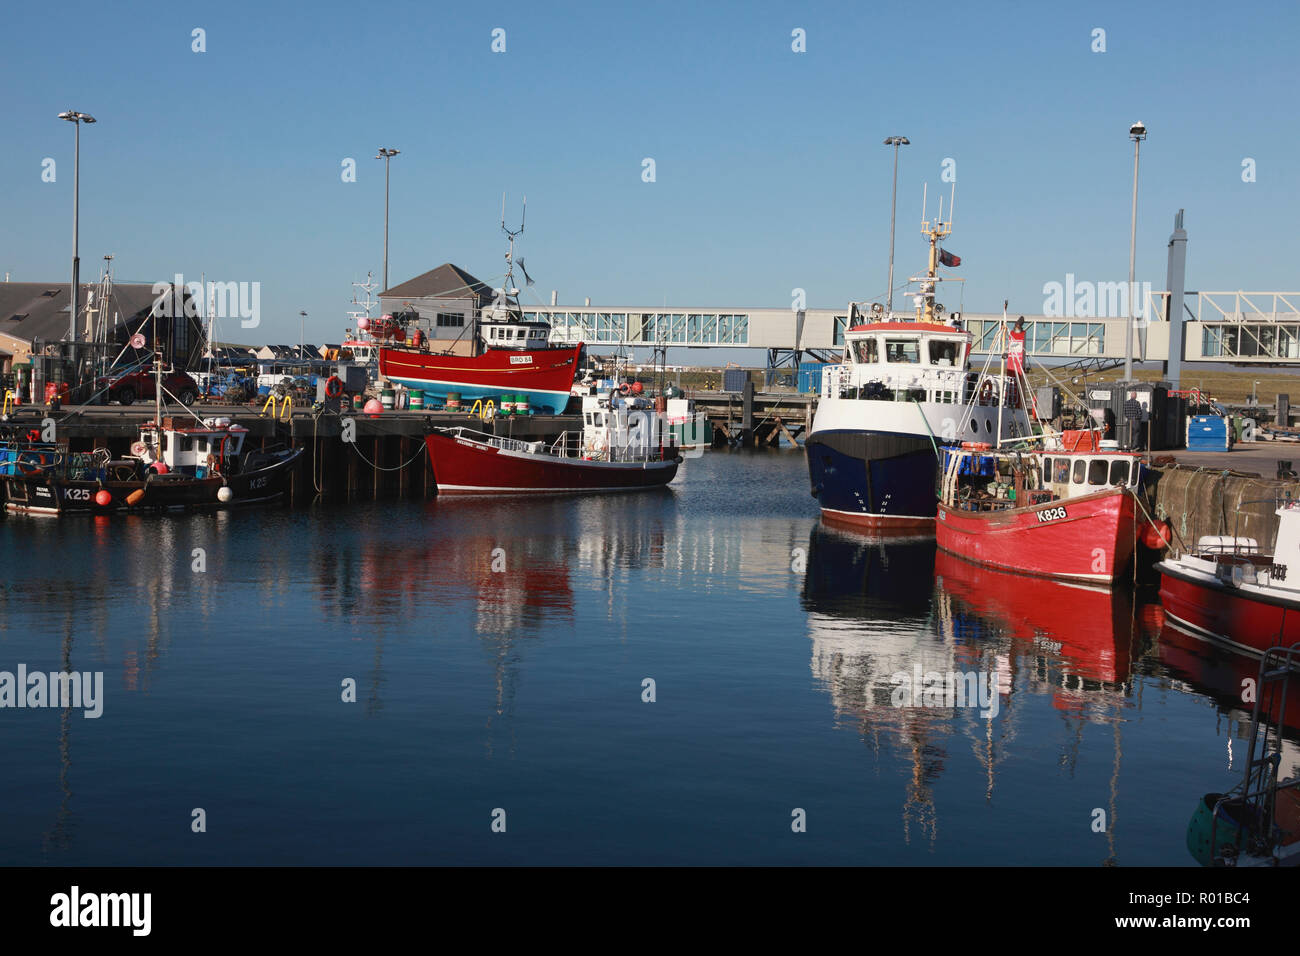 The harbour in Stromness, Orkney with fishing boats, the Hoy/Graemsay ferry centre right, and a ferry passenger footbridge Stock Photo